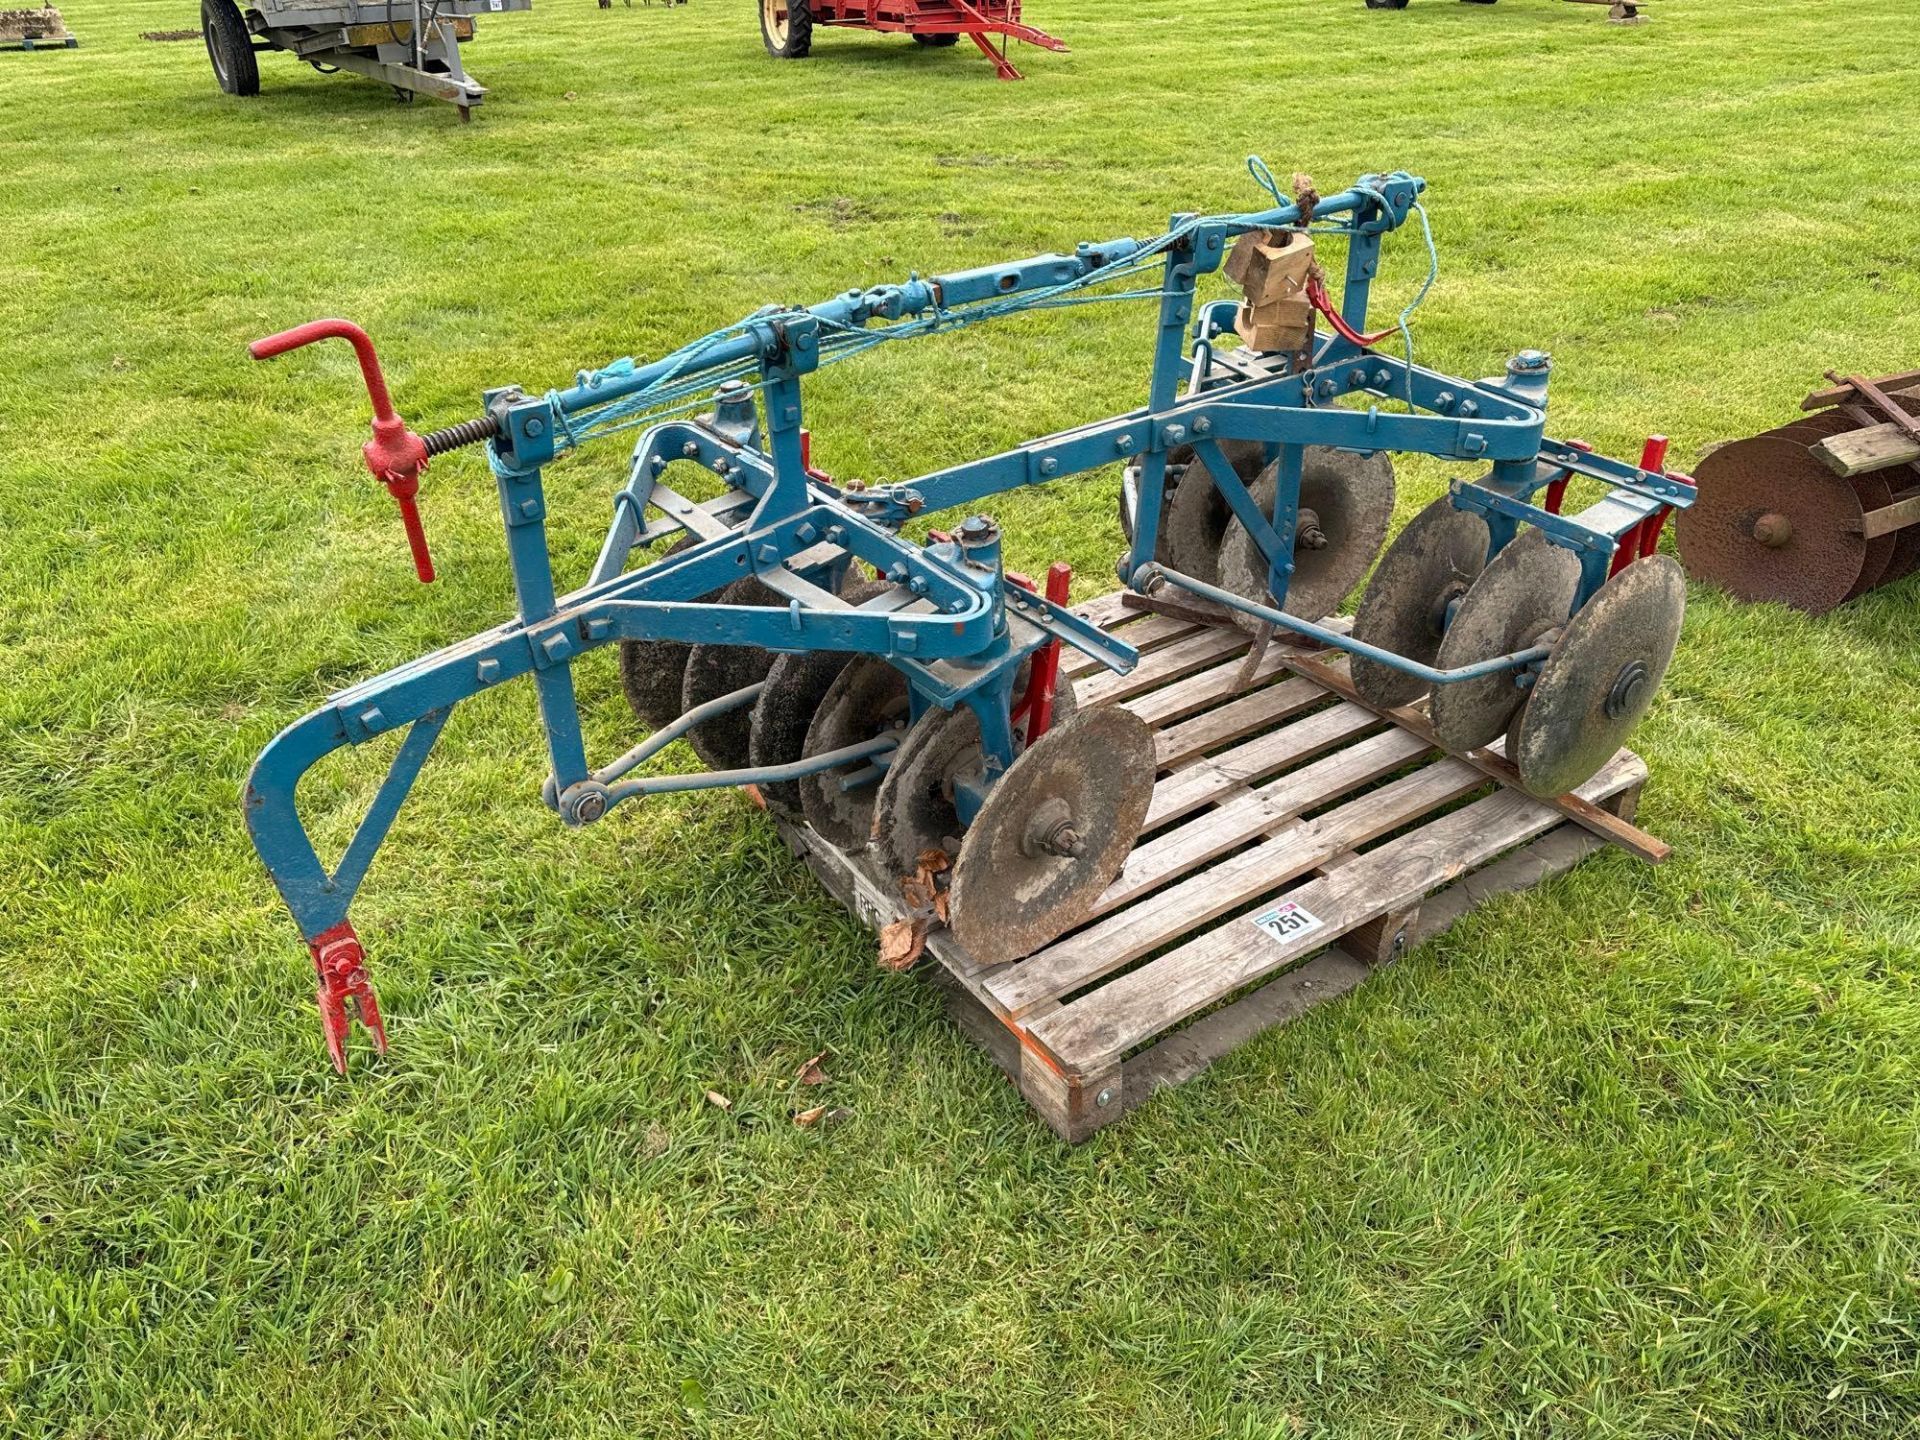 Set Ransomes 3' trailed discs to suit Ransomes crawler